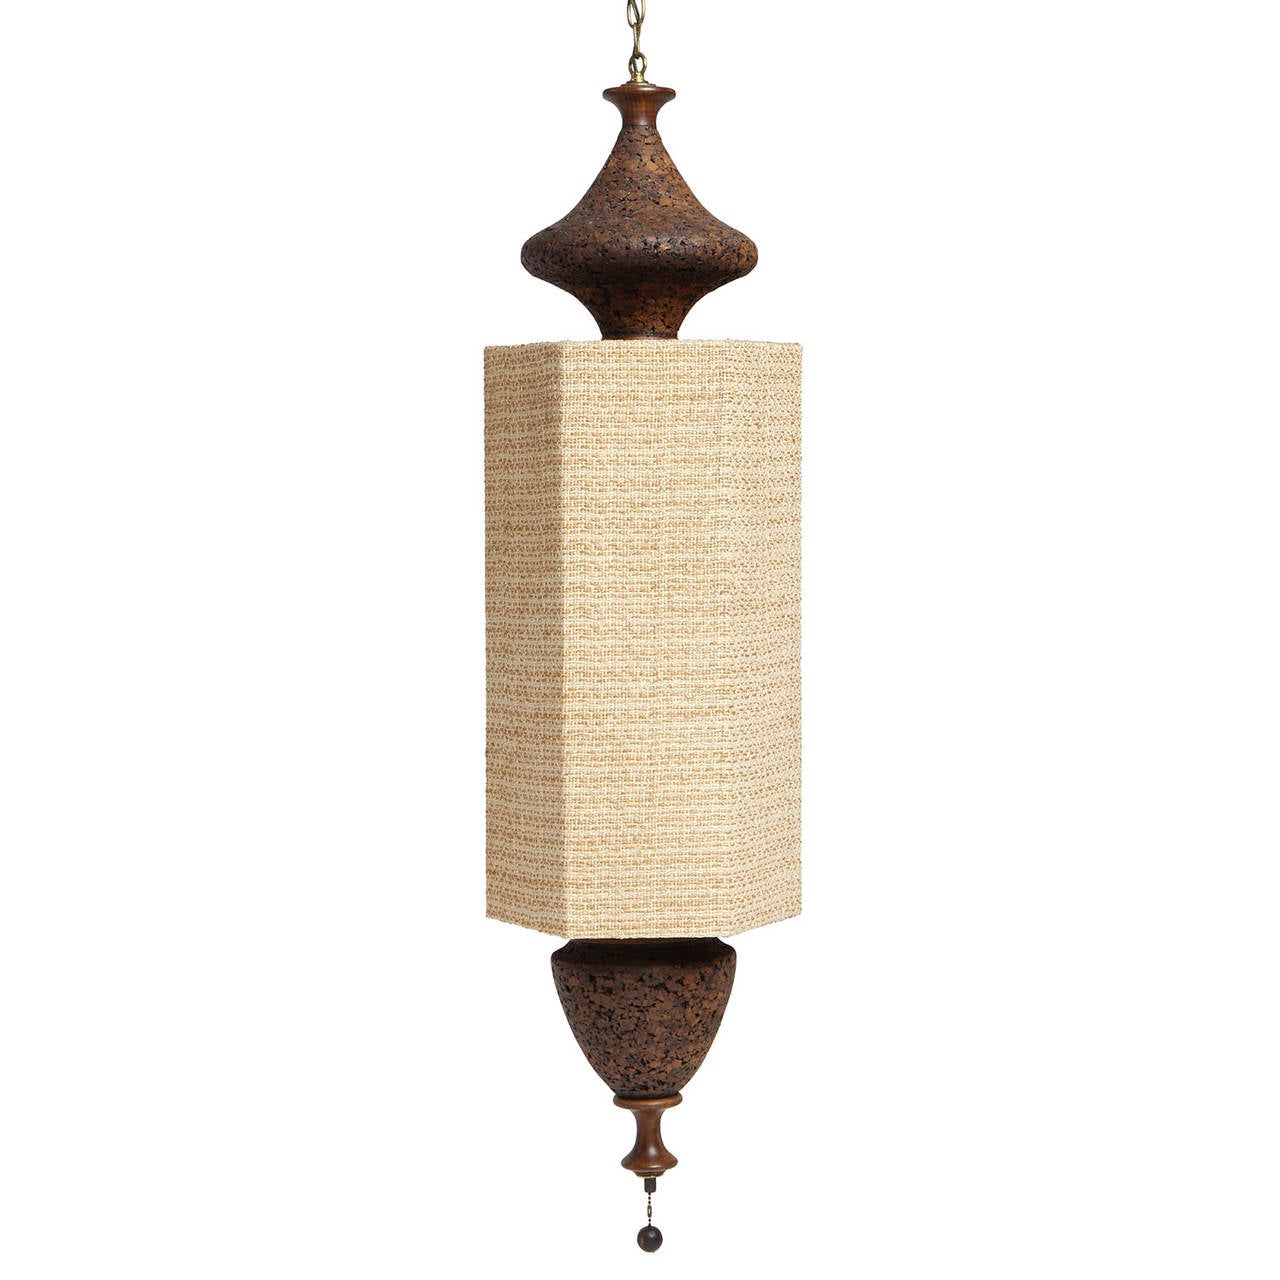 A well scaled and unusual hanging pendant lamp having sculptural cork ends capped with turned wood finials and a central fabric wrapped hexagonal shade.